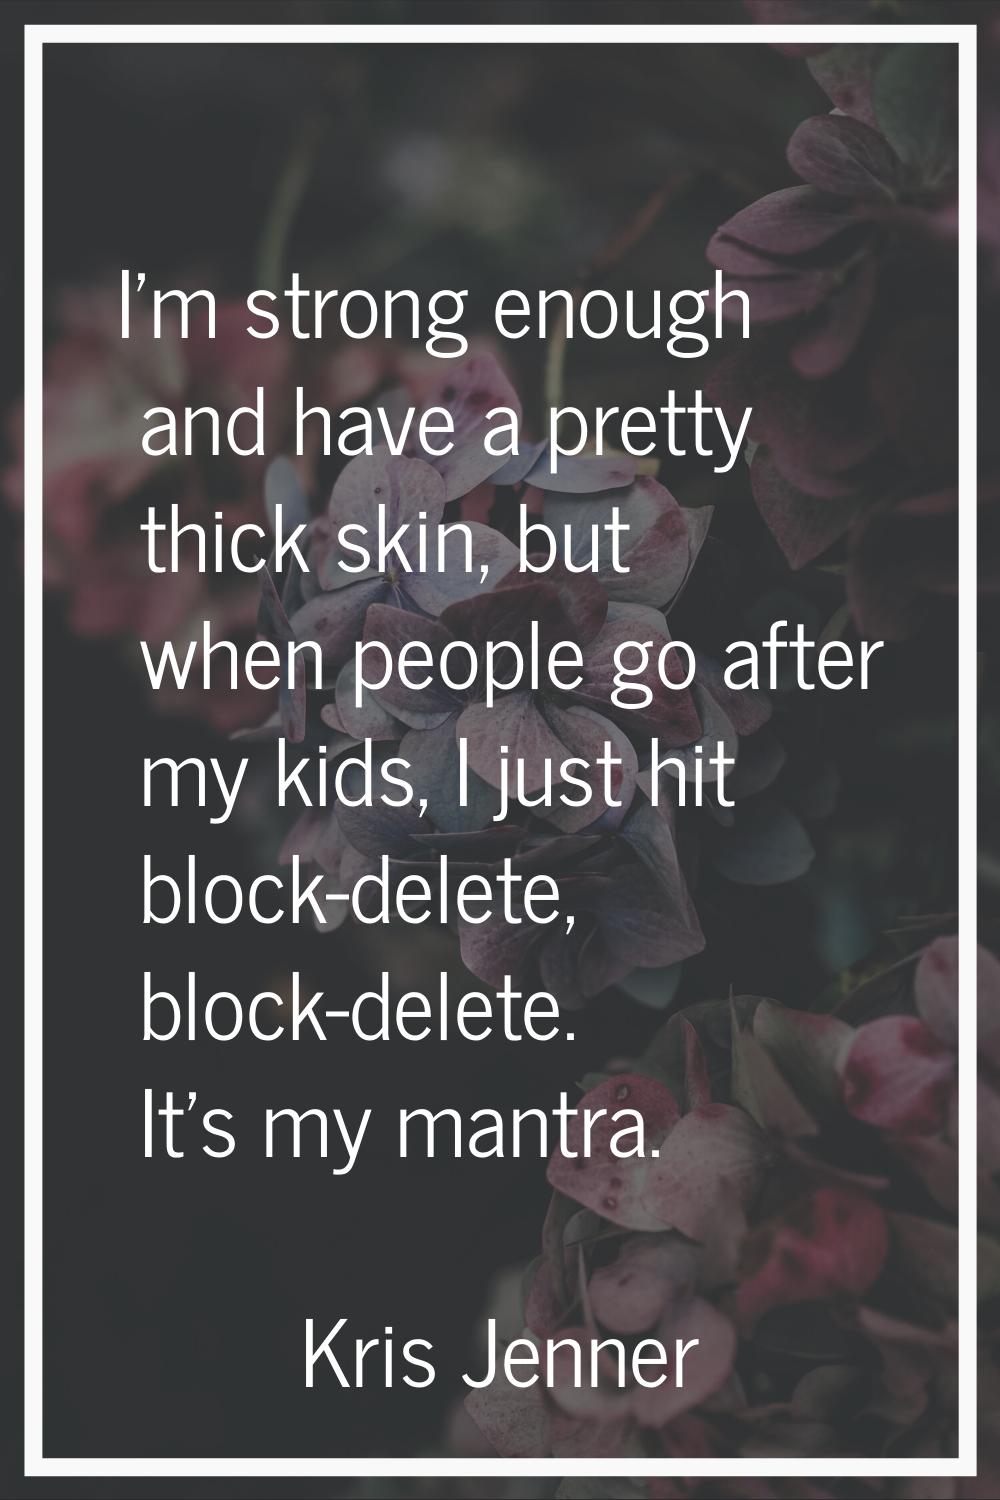 I'm strong enough and have a pretty thick skin, but when people go after my kids, I just hit block-